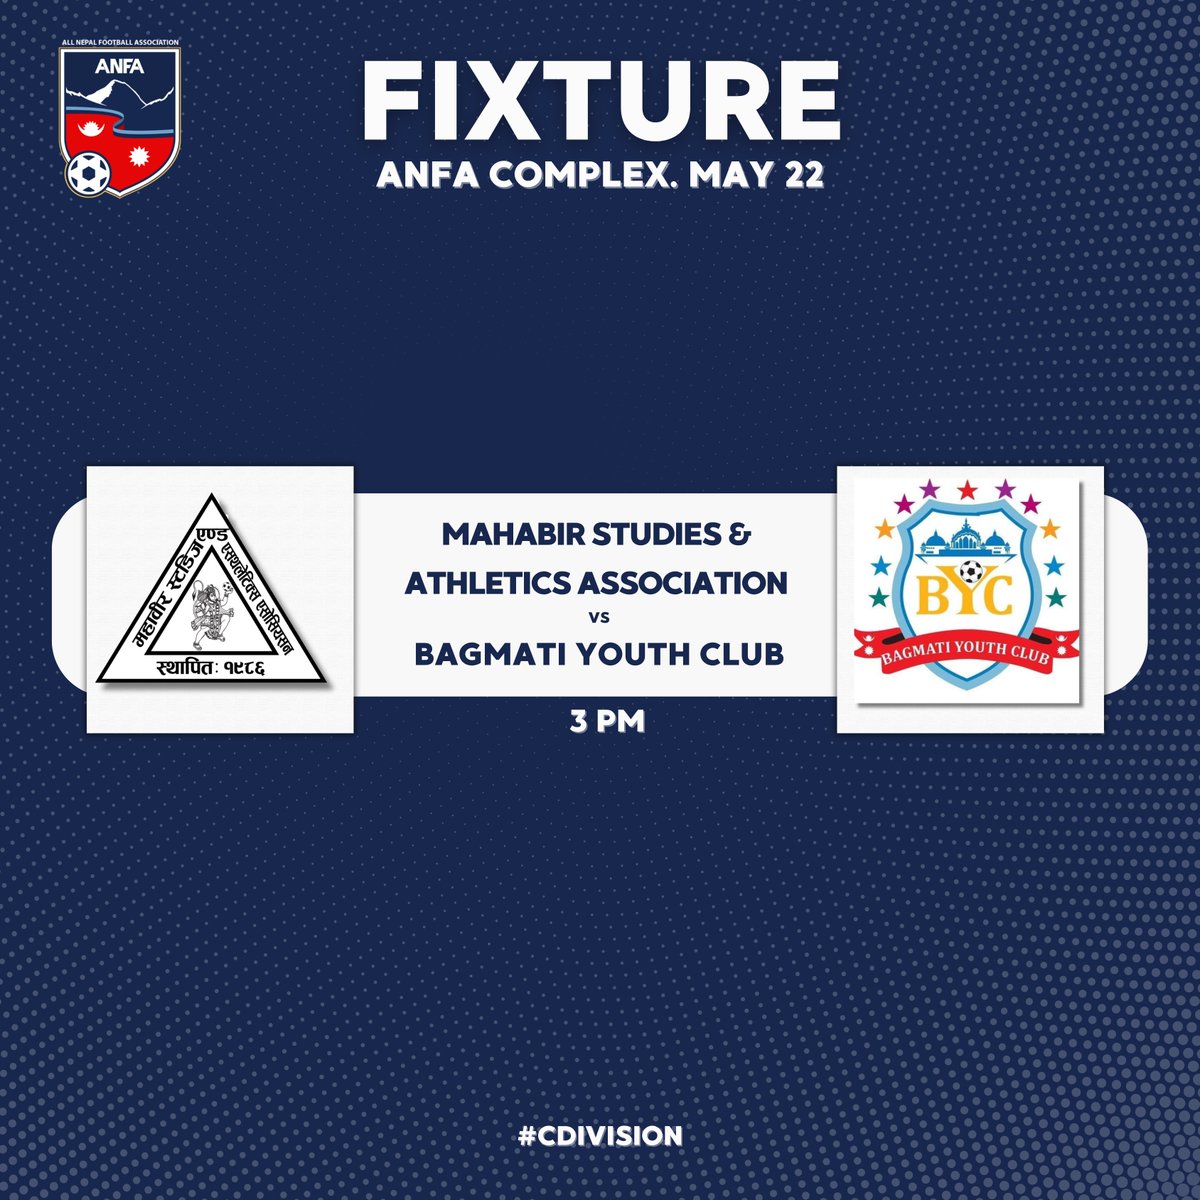 The final fixture of round 9 of #CDivision. #ANFA